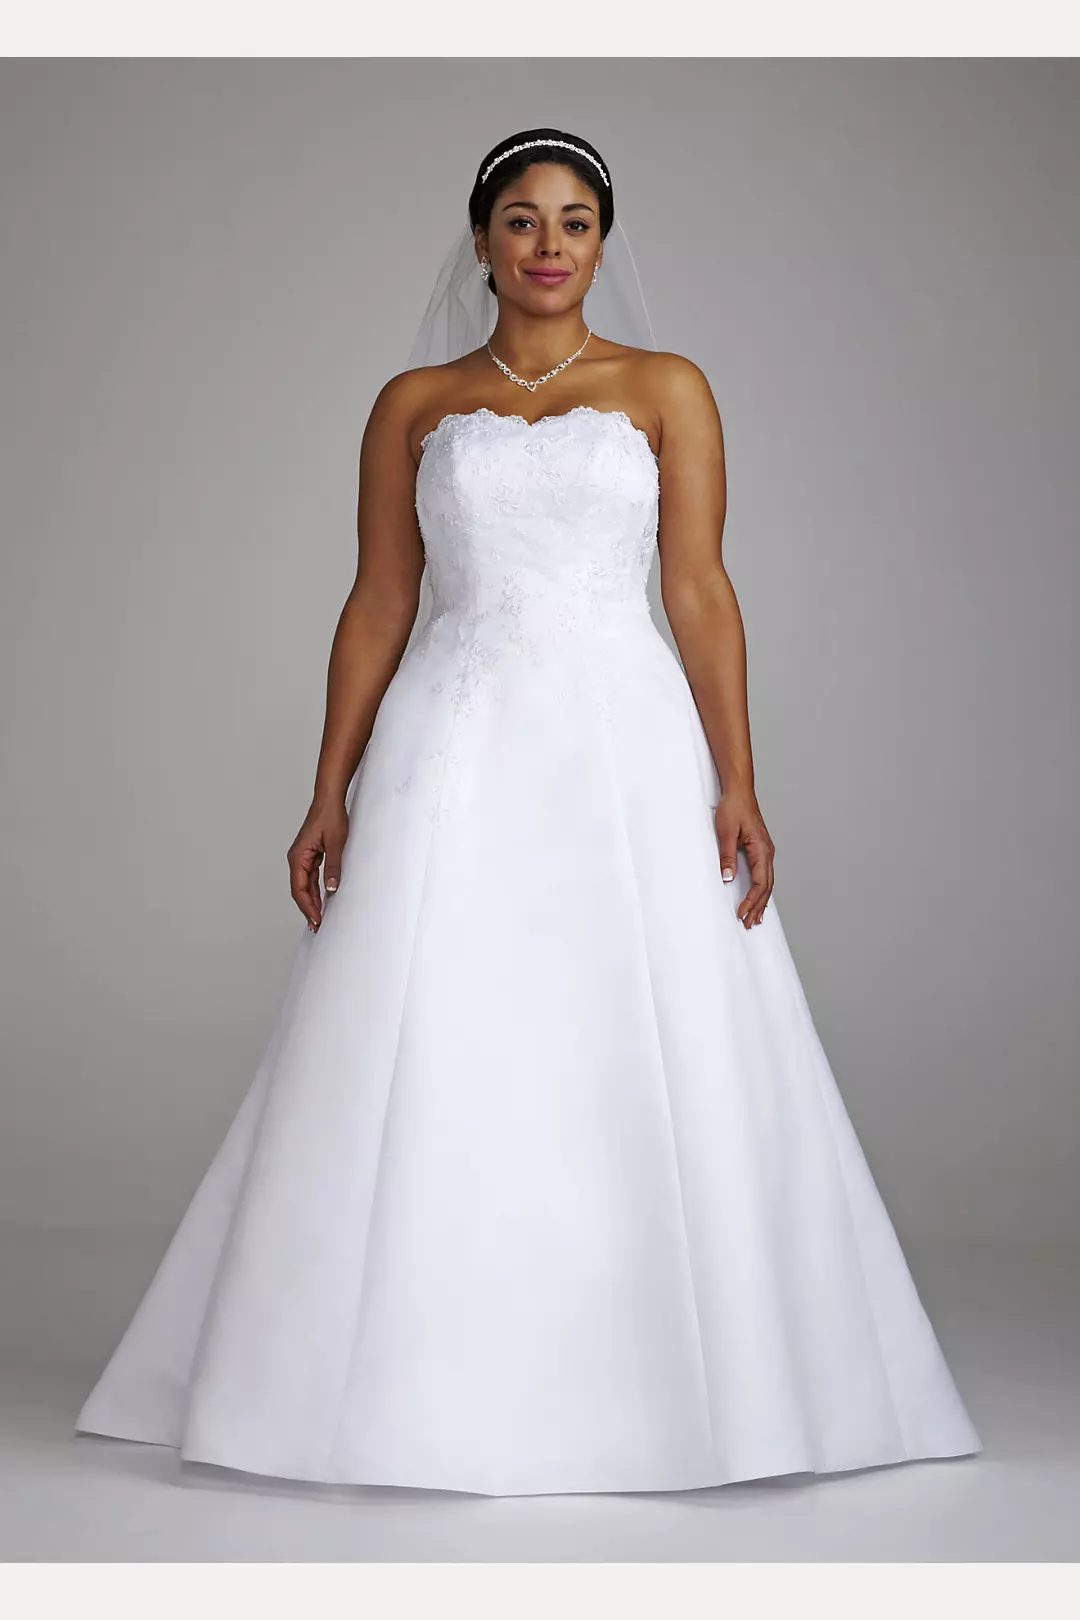 Aline Gown with Beaded Lace and Scalloped Neckline Image